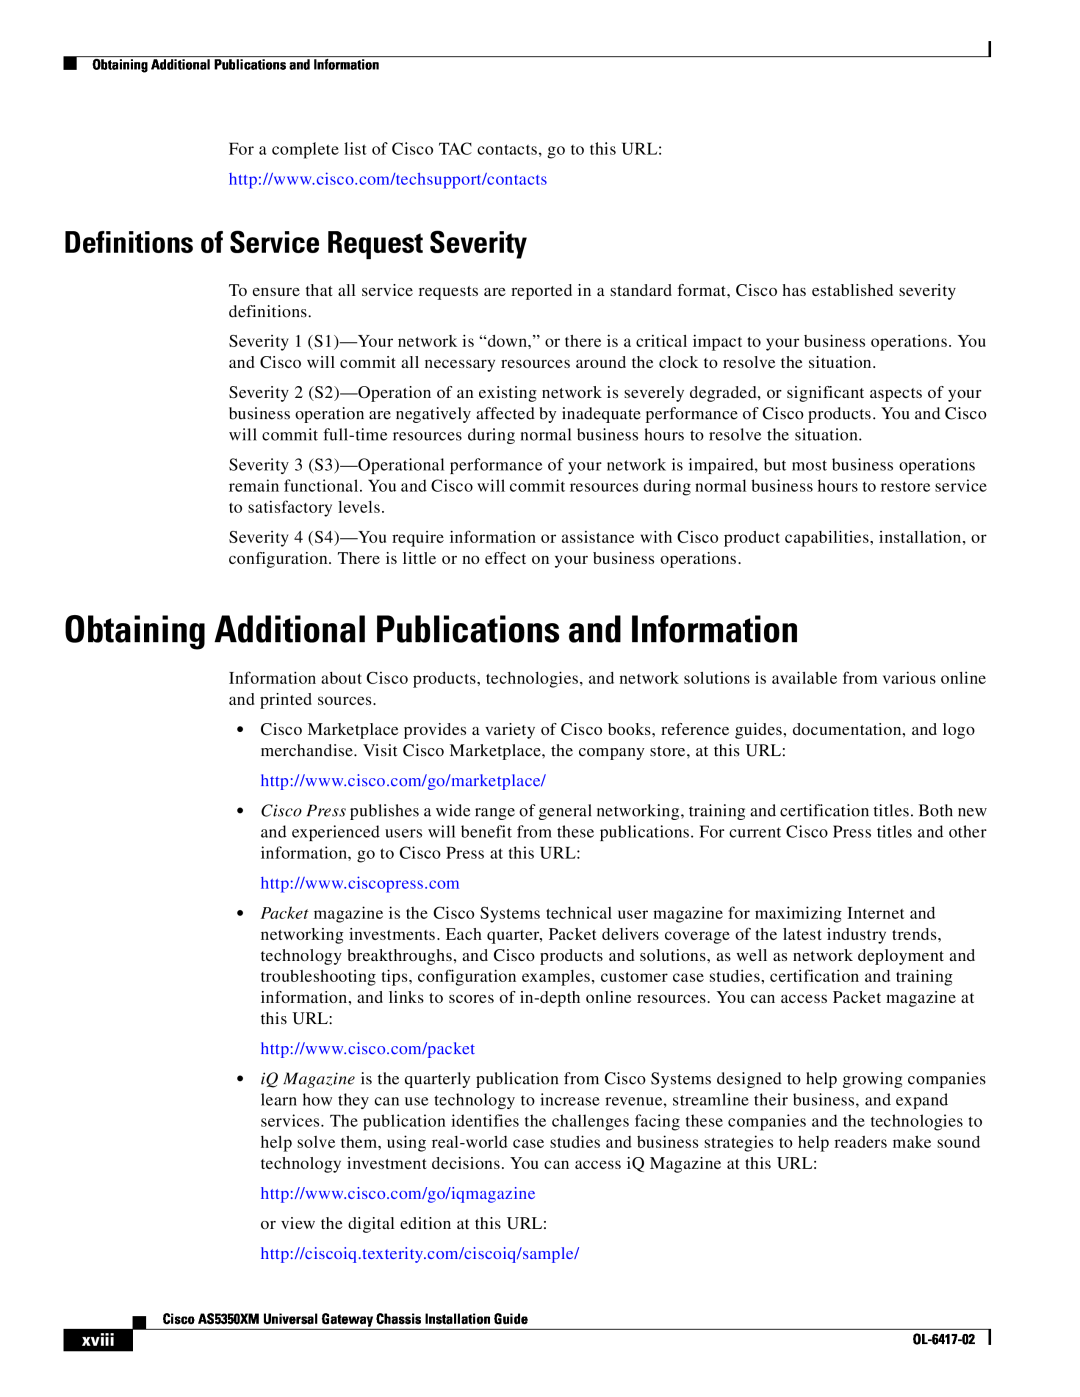 Cisco Systems AS5350XM Obtaining Additional Publications and Information, Definitions of Service Request Severity, xviii 